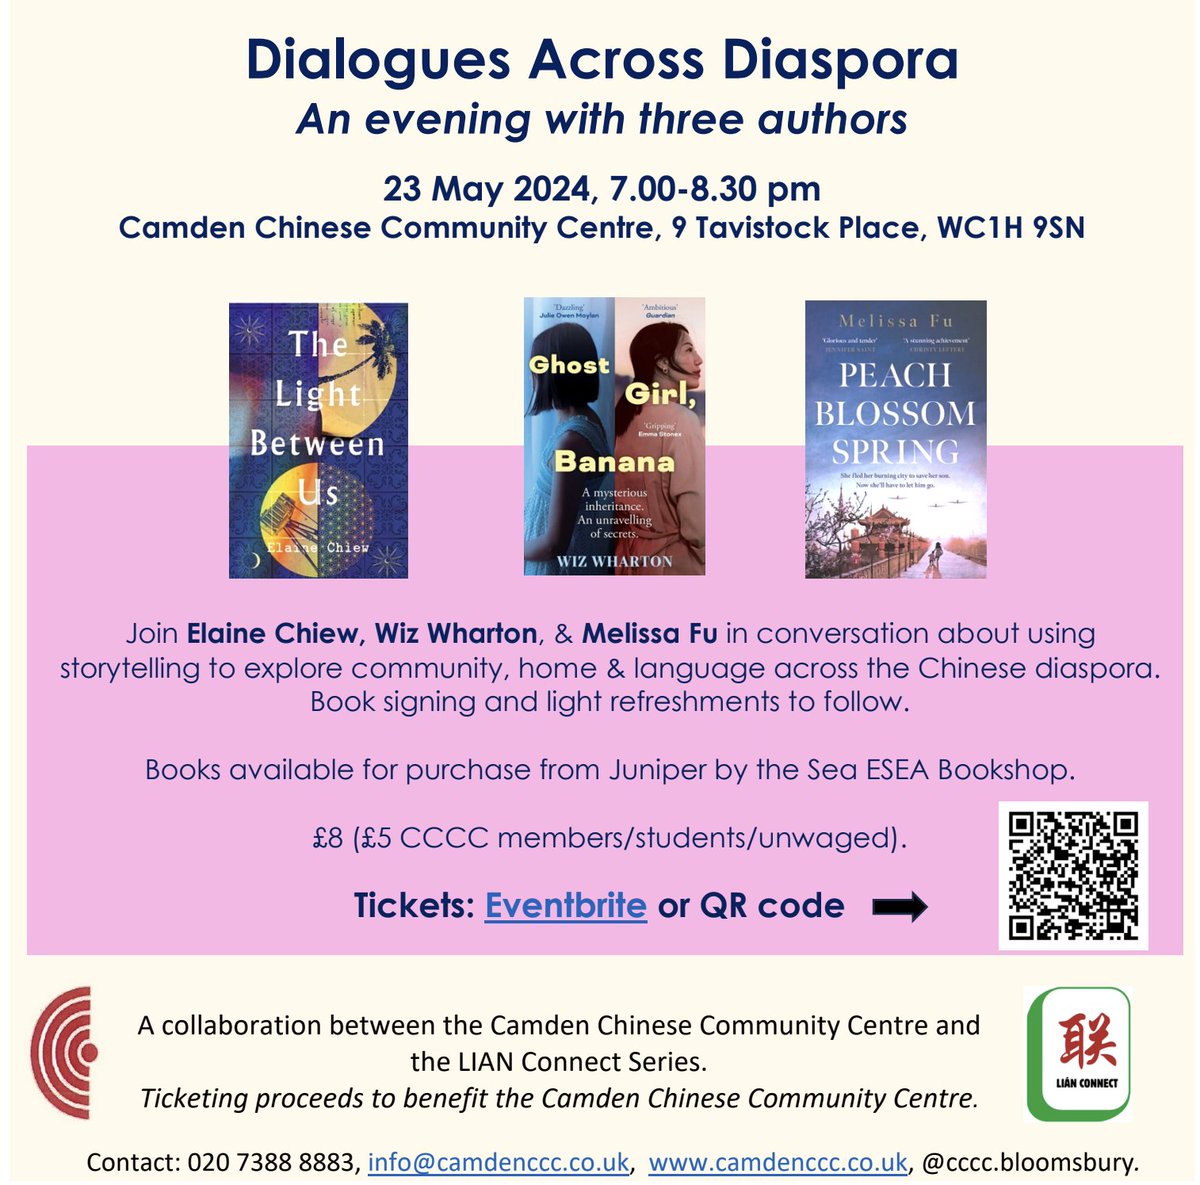 Thrilled to be part of this event in aid of @CamdenChinese. All are welcome to join us on 23rd May for what promises to be a brilliant discussion on identity, language & the meaning of home across the Chinese diaspora with myself and the brilliant Melissa Fu and @ChiewElaine